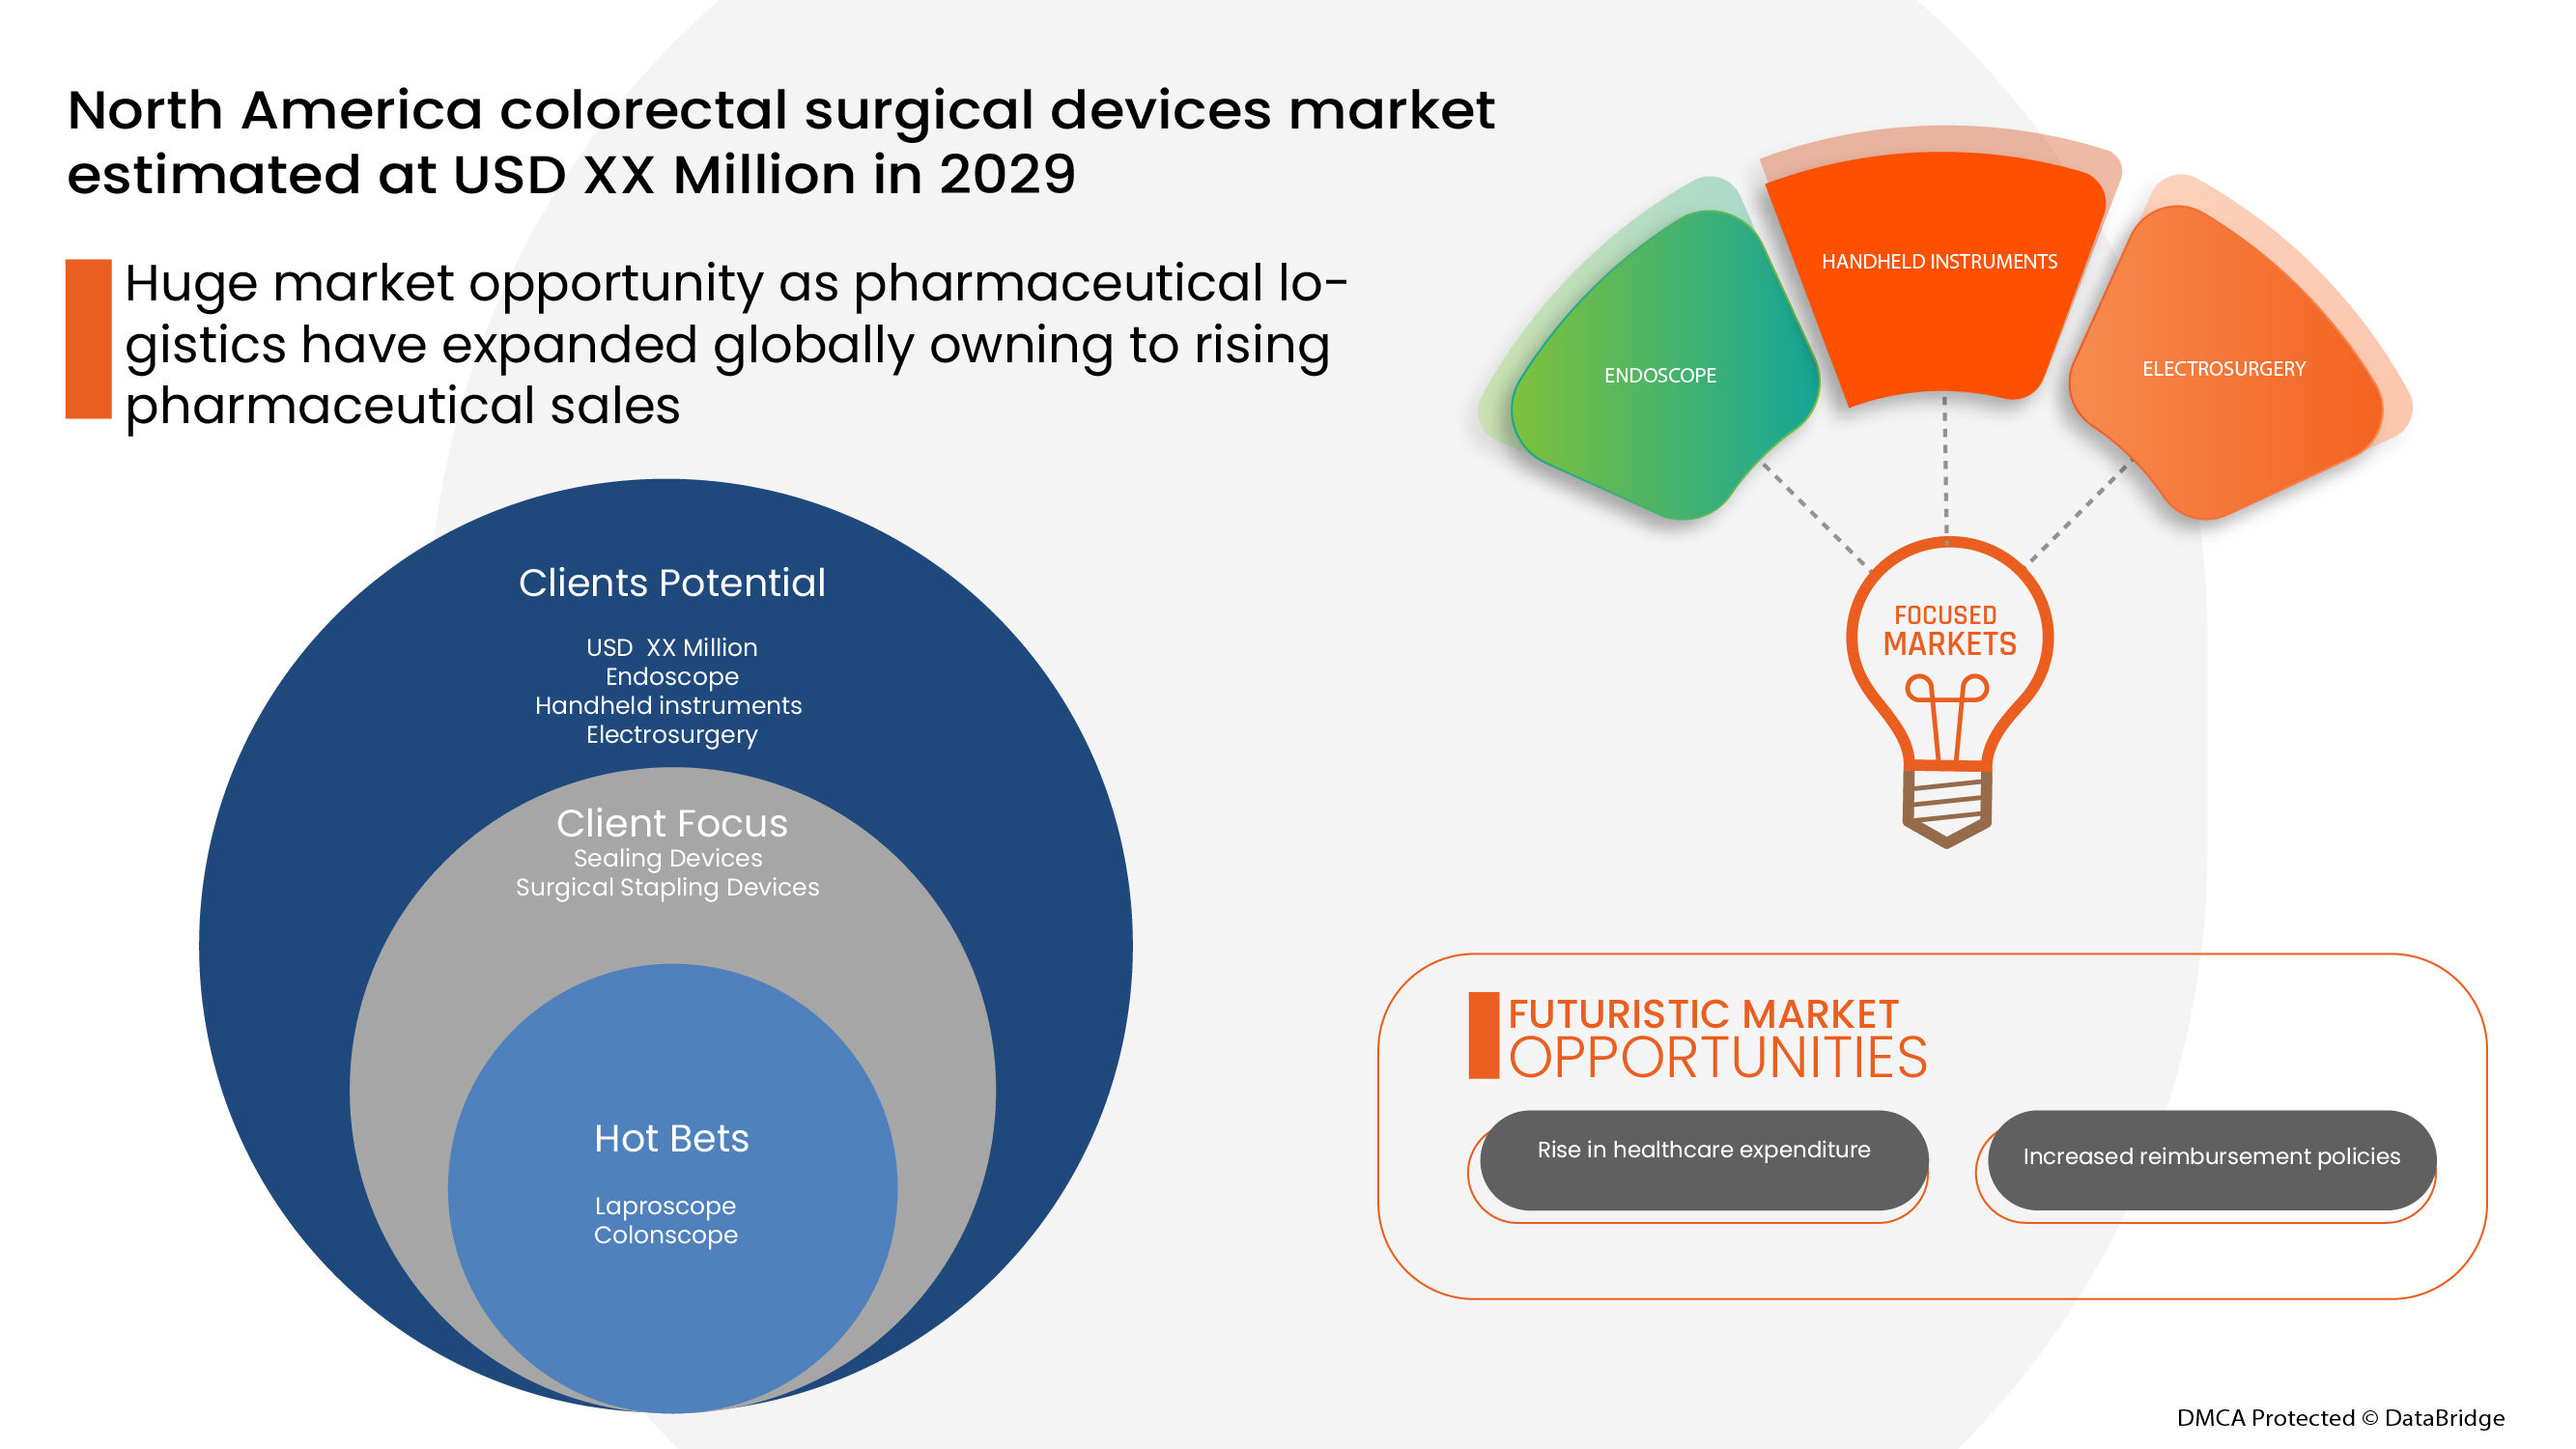 North America Colorectal Surgical Devices Market 